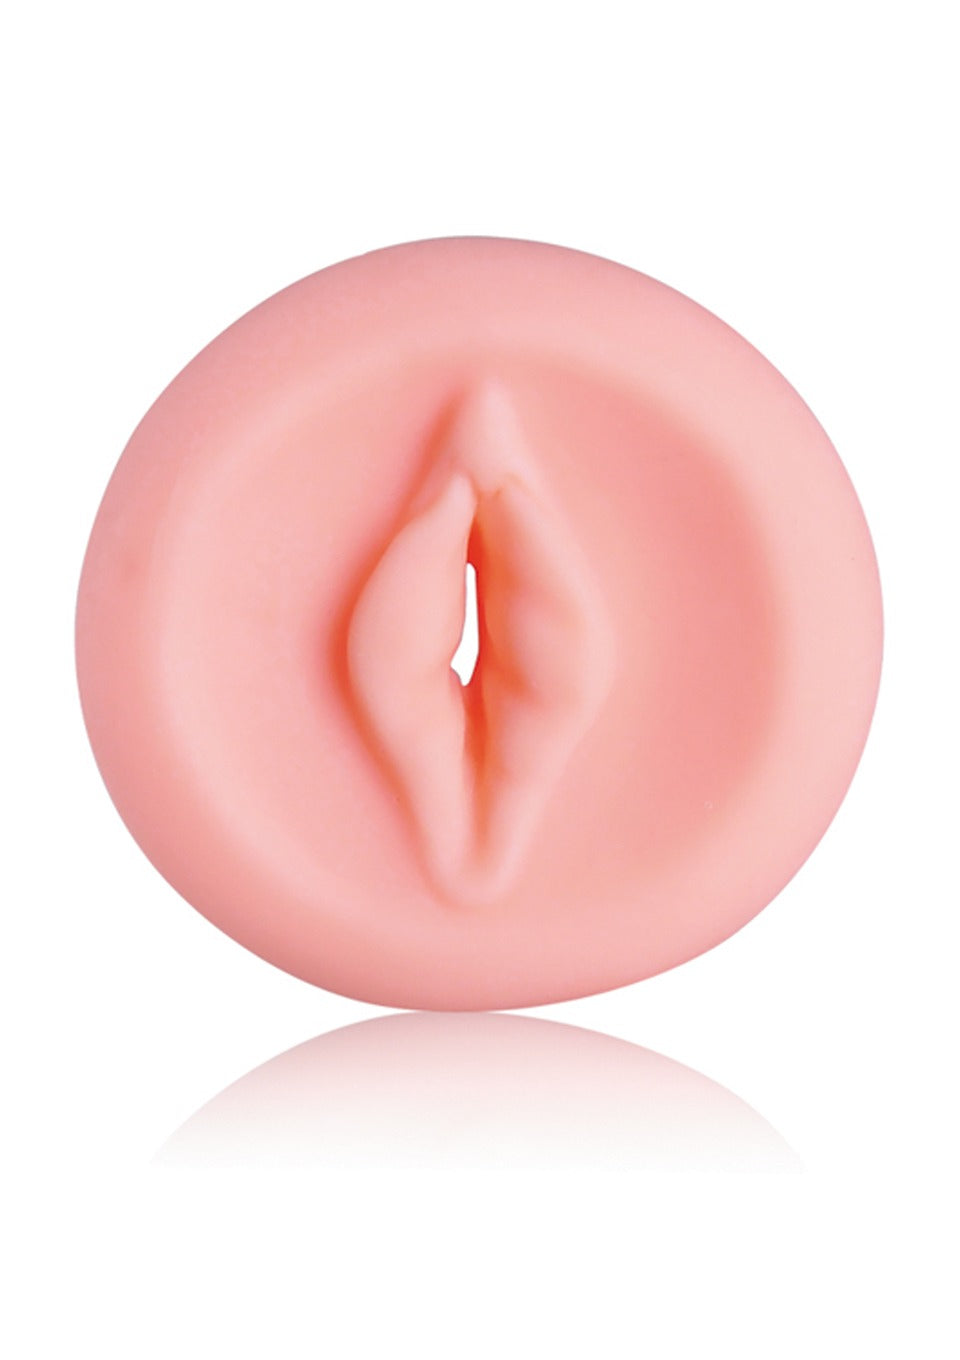 Bossoftoys - 60-00015 - Huge Vagina for Penis Pump - Penispump - Put on and play - bulk packed , no colour box